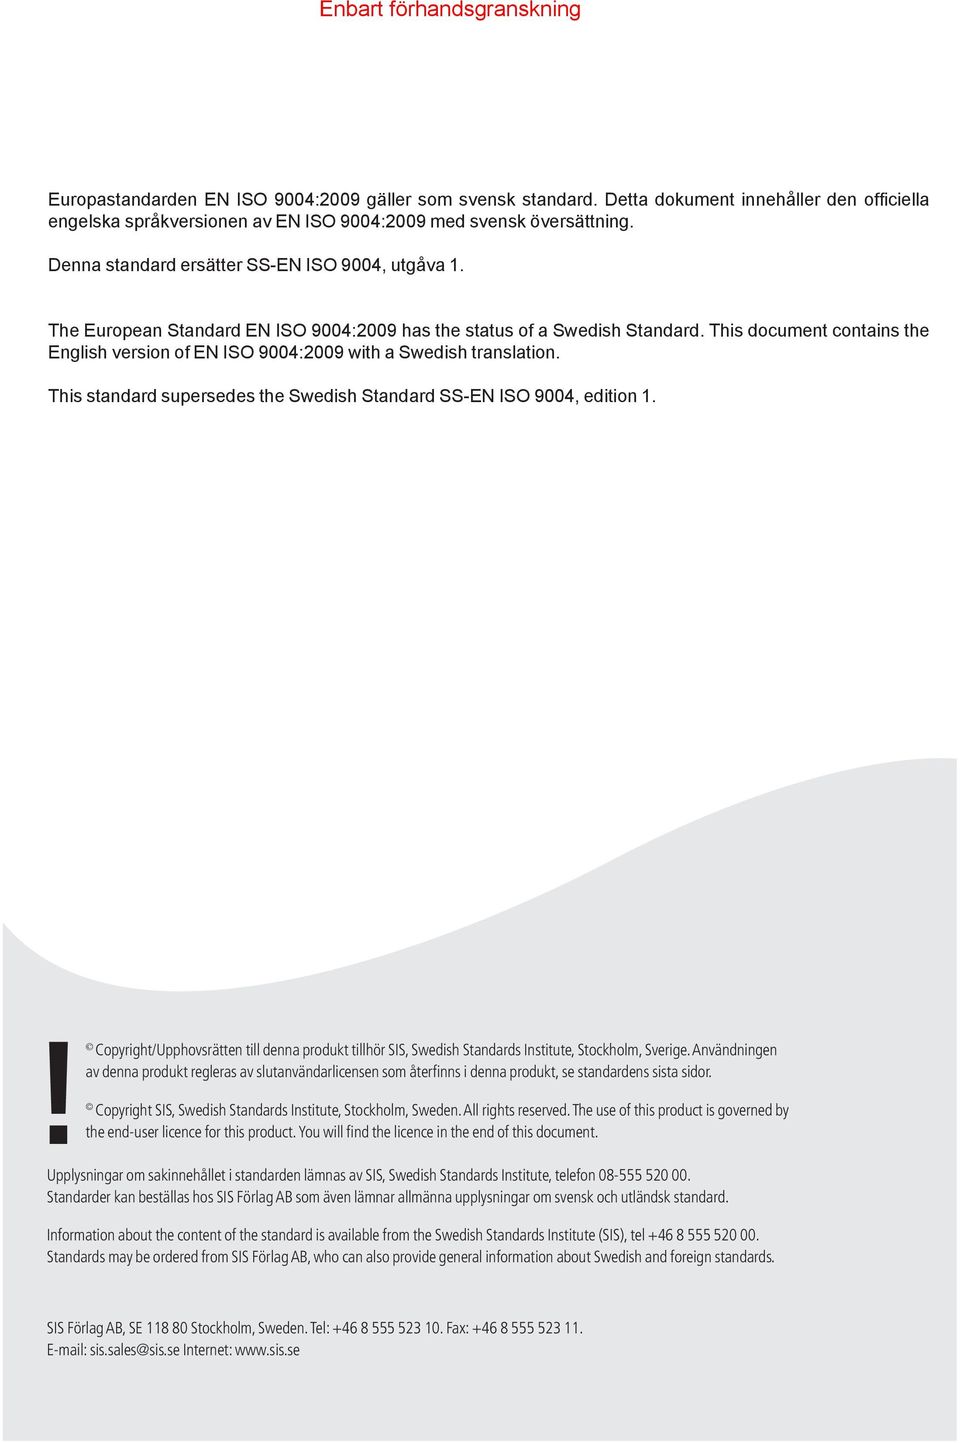 This document contains the English version of EN ISO 9004:2009 with a Swedish translation. This standard supersedes the Swedish Standard SS-EN ISO 9004, edition 1.